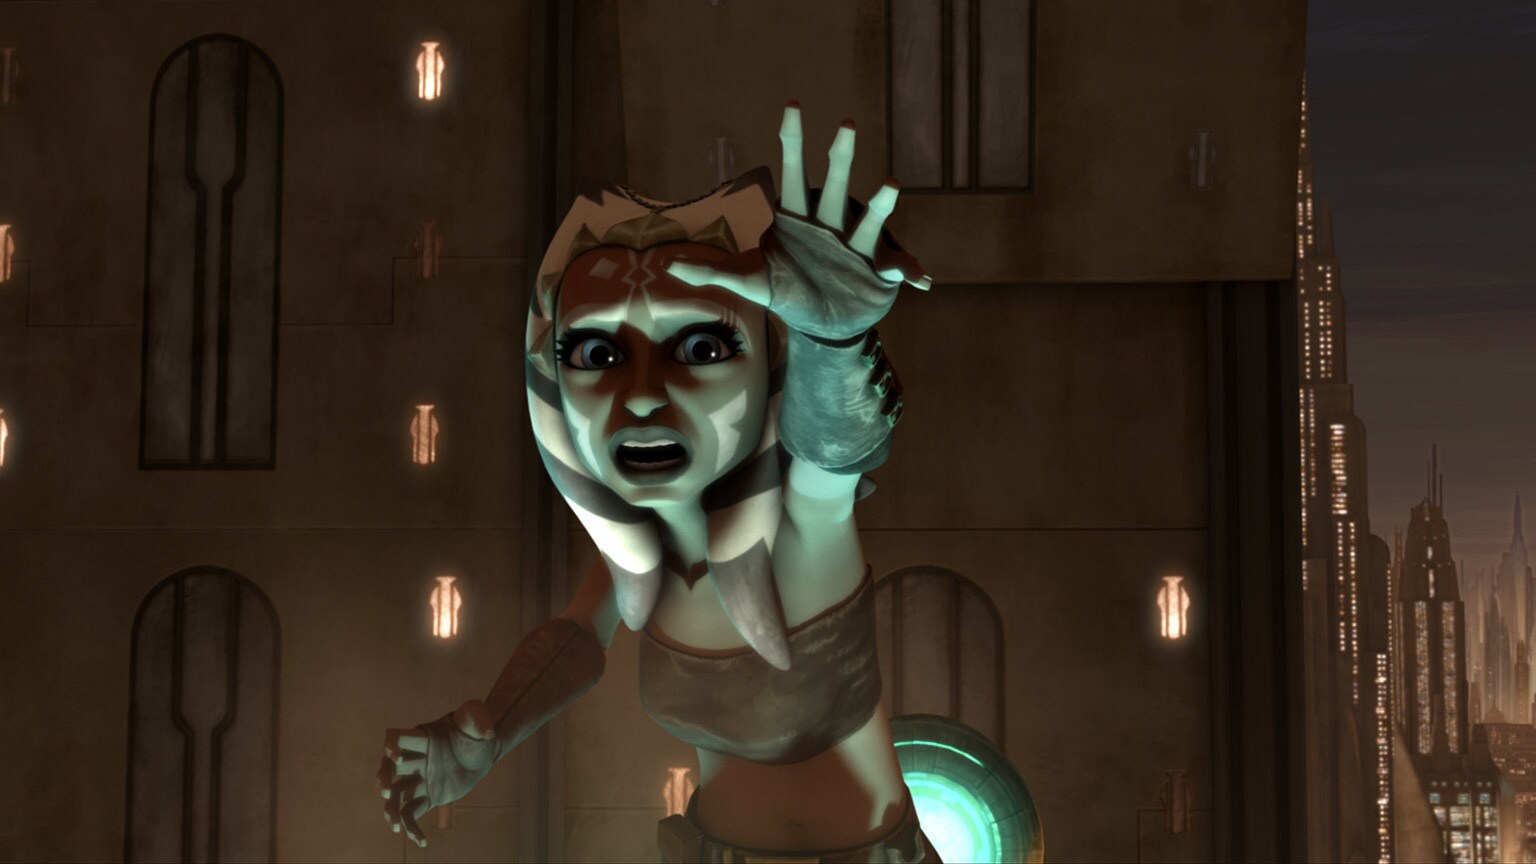 The Clone Wars Rewatch: A Padawan's Pride and a "Lightsaber Lost"